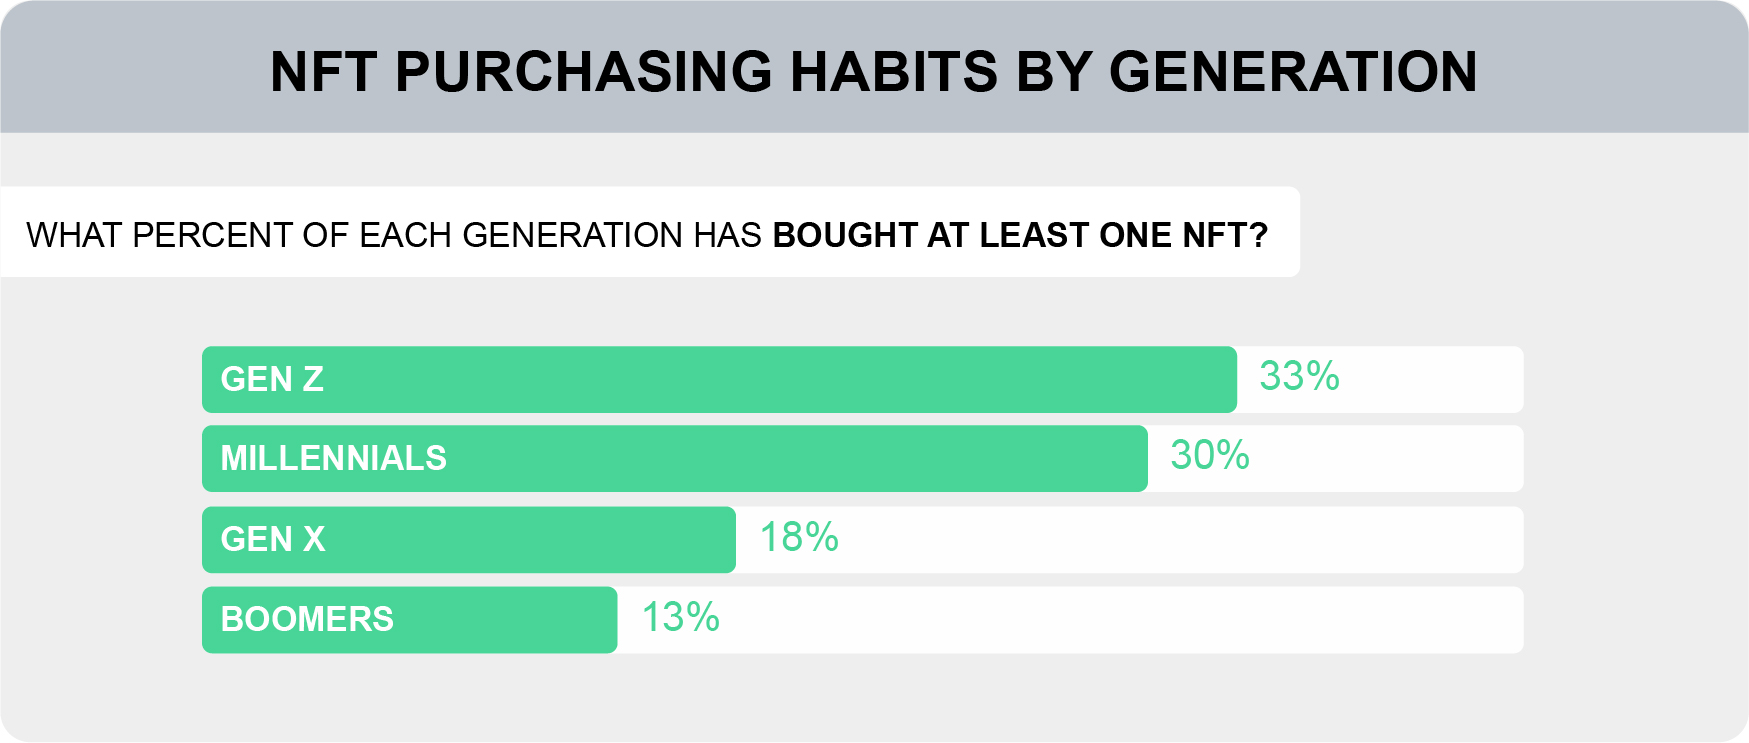 What percent of each generation has bought at least one NFT?